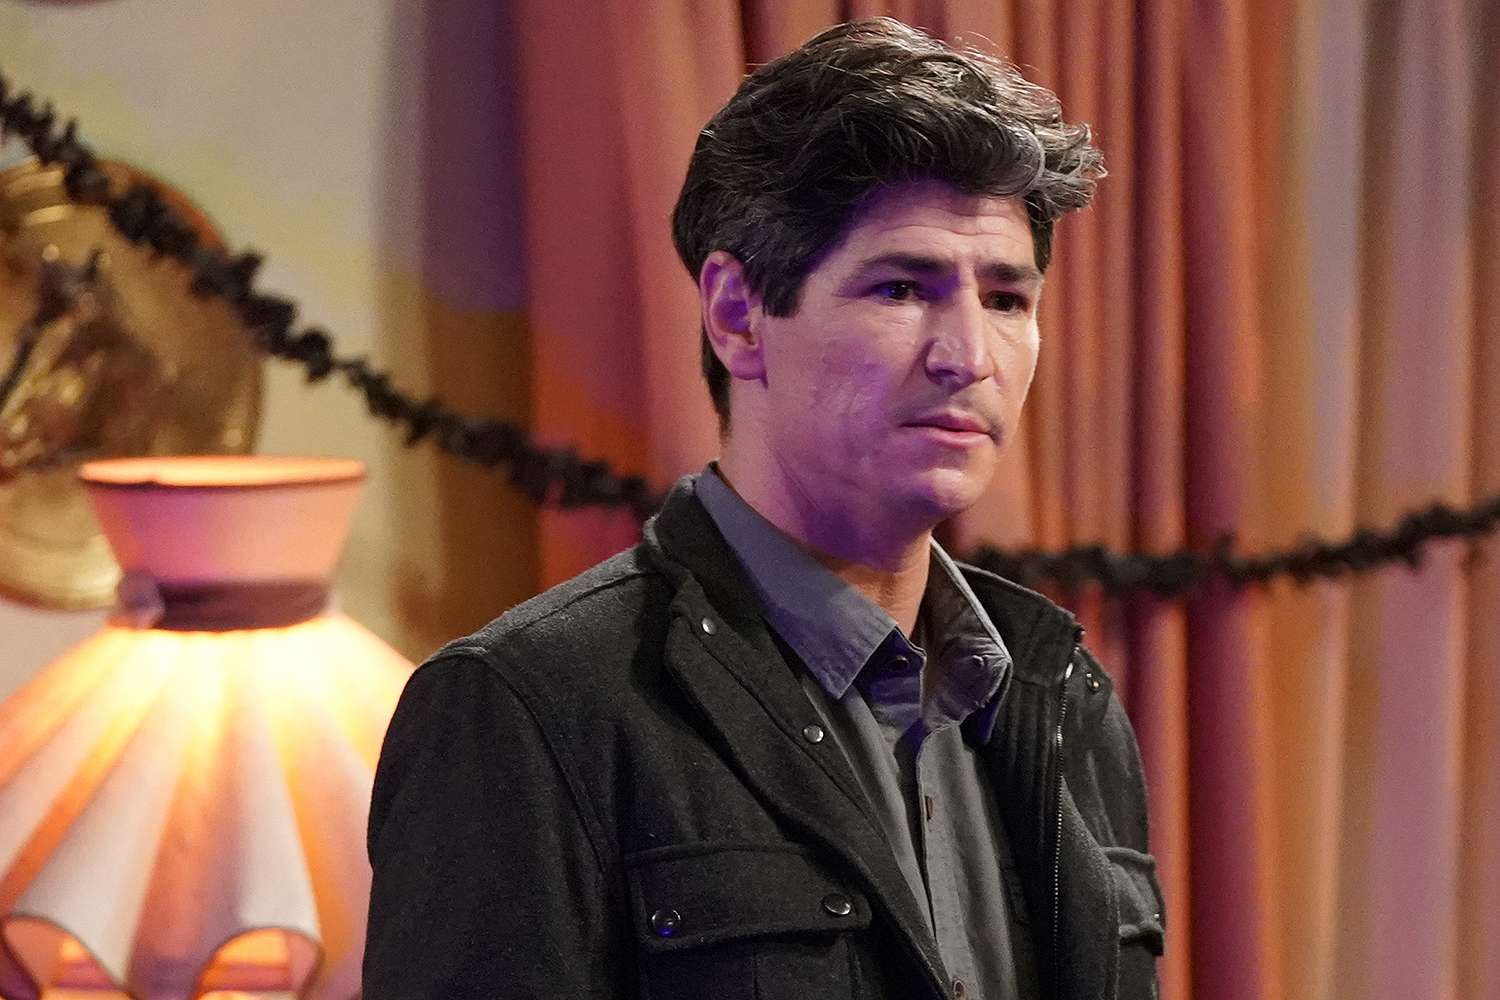 Michael Fishman as D.J. Conner on The Conners